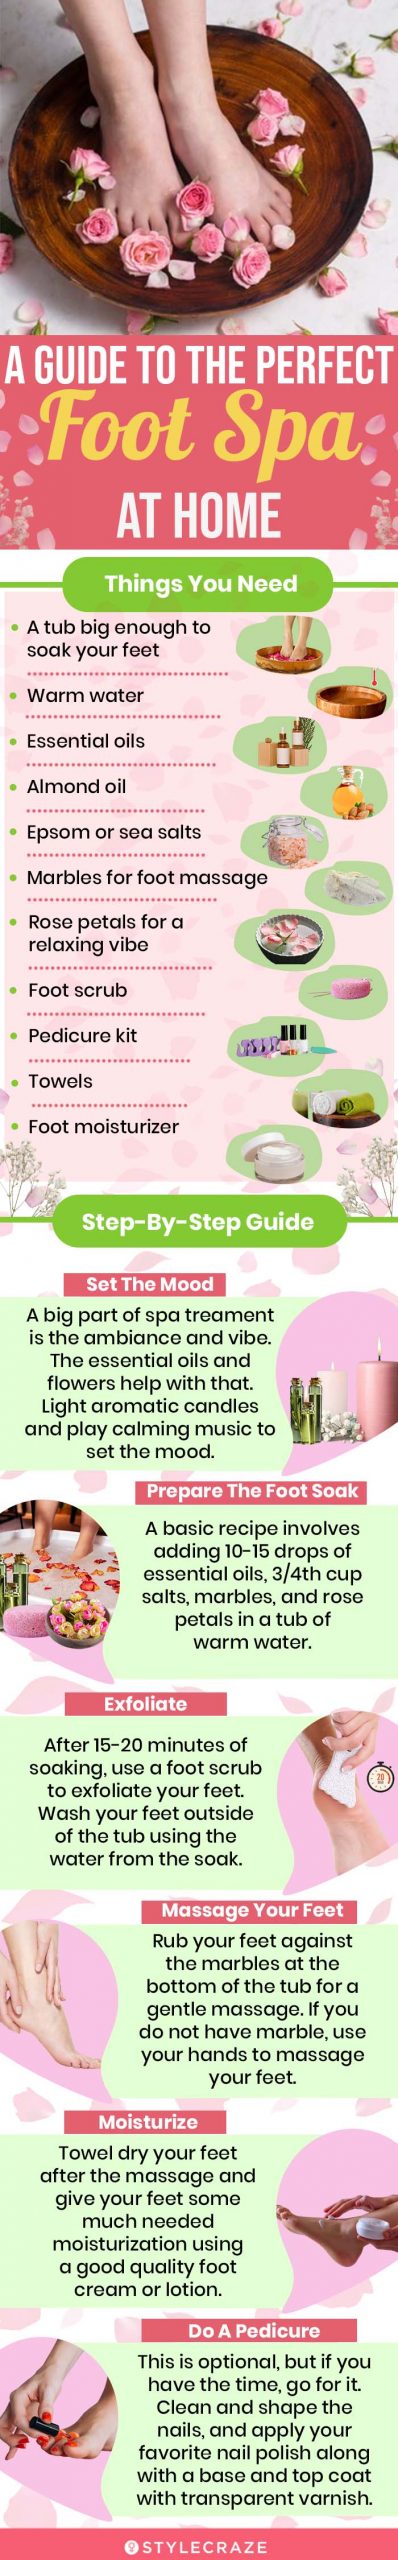 At-Home Pedicures: A Guide To Perfect Foot Care